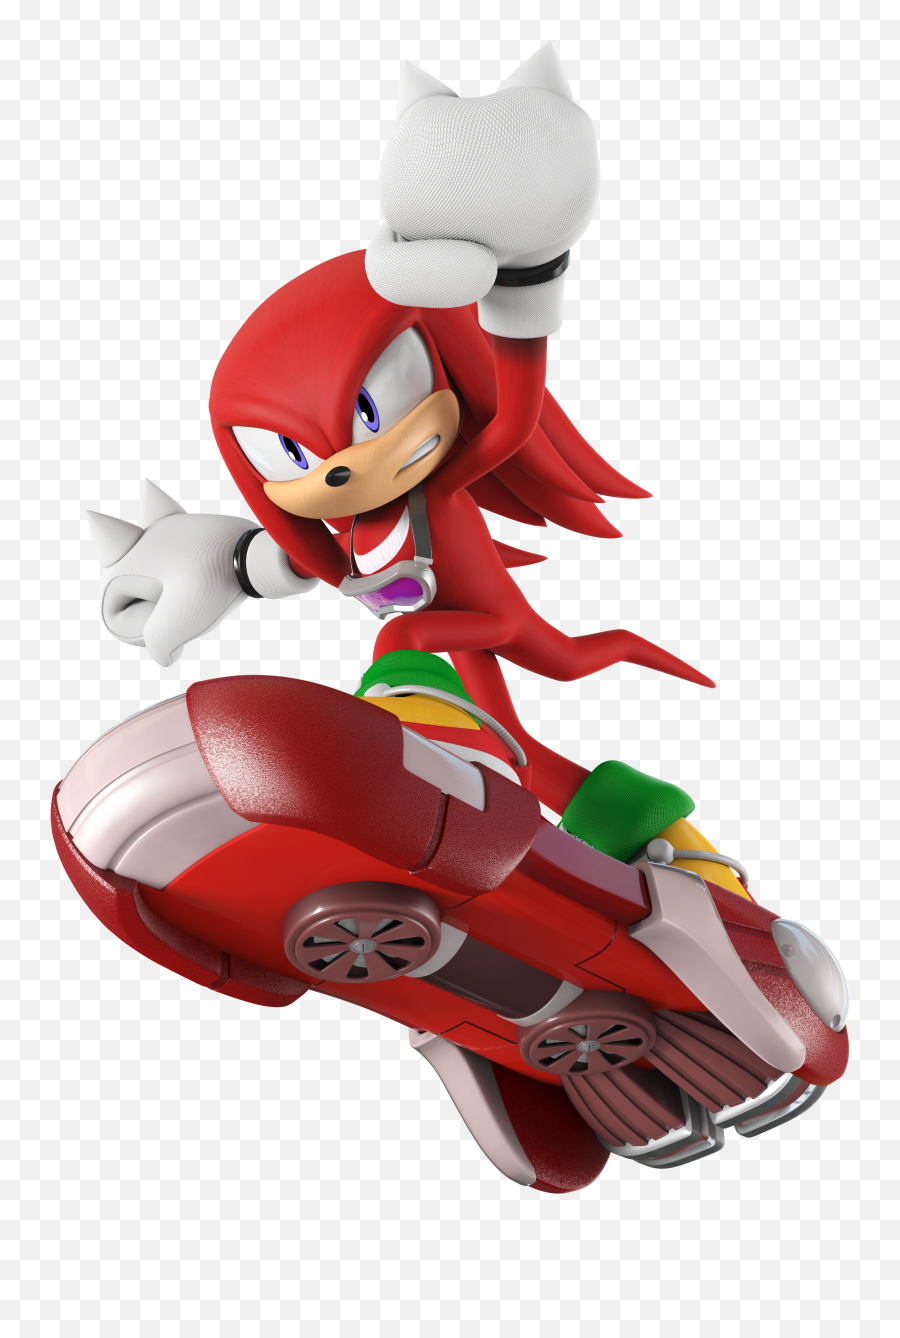 Fileknuckles Free Riderspng - Sonic Retro Sonic Riders Zero Gravity Knuckles,Knuckles The Echidna Png